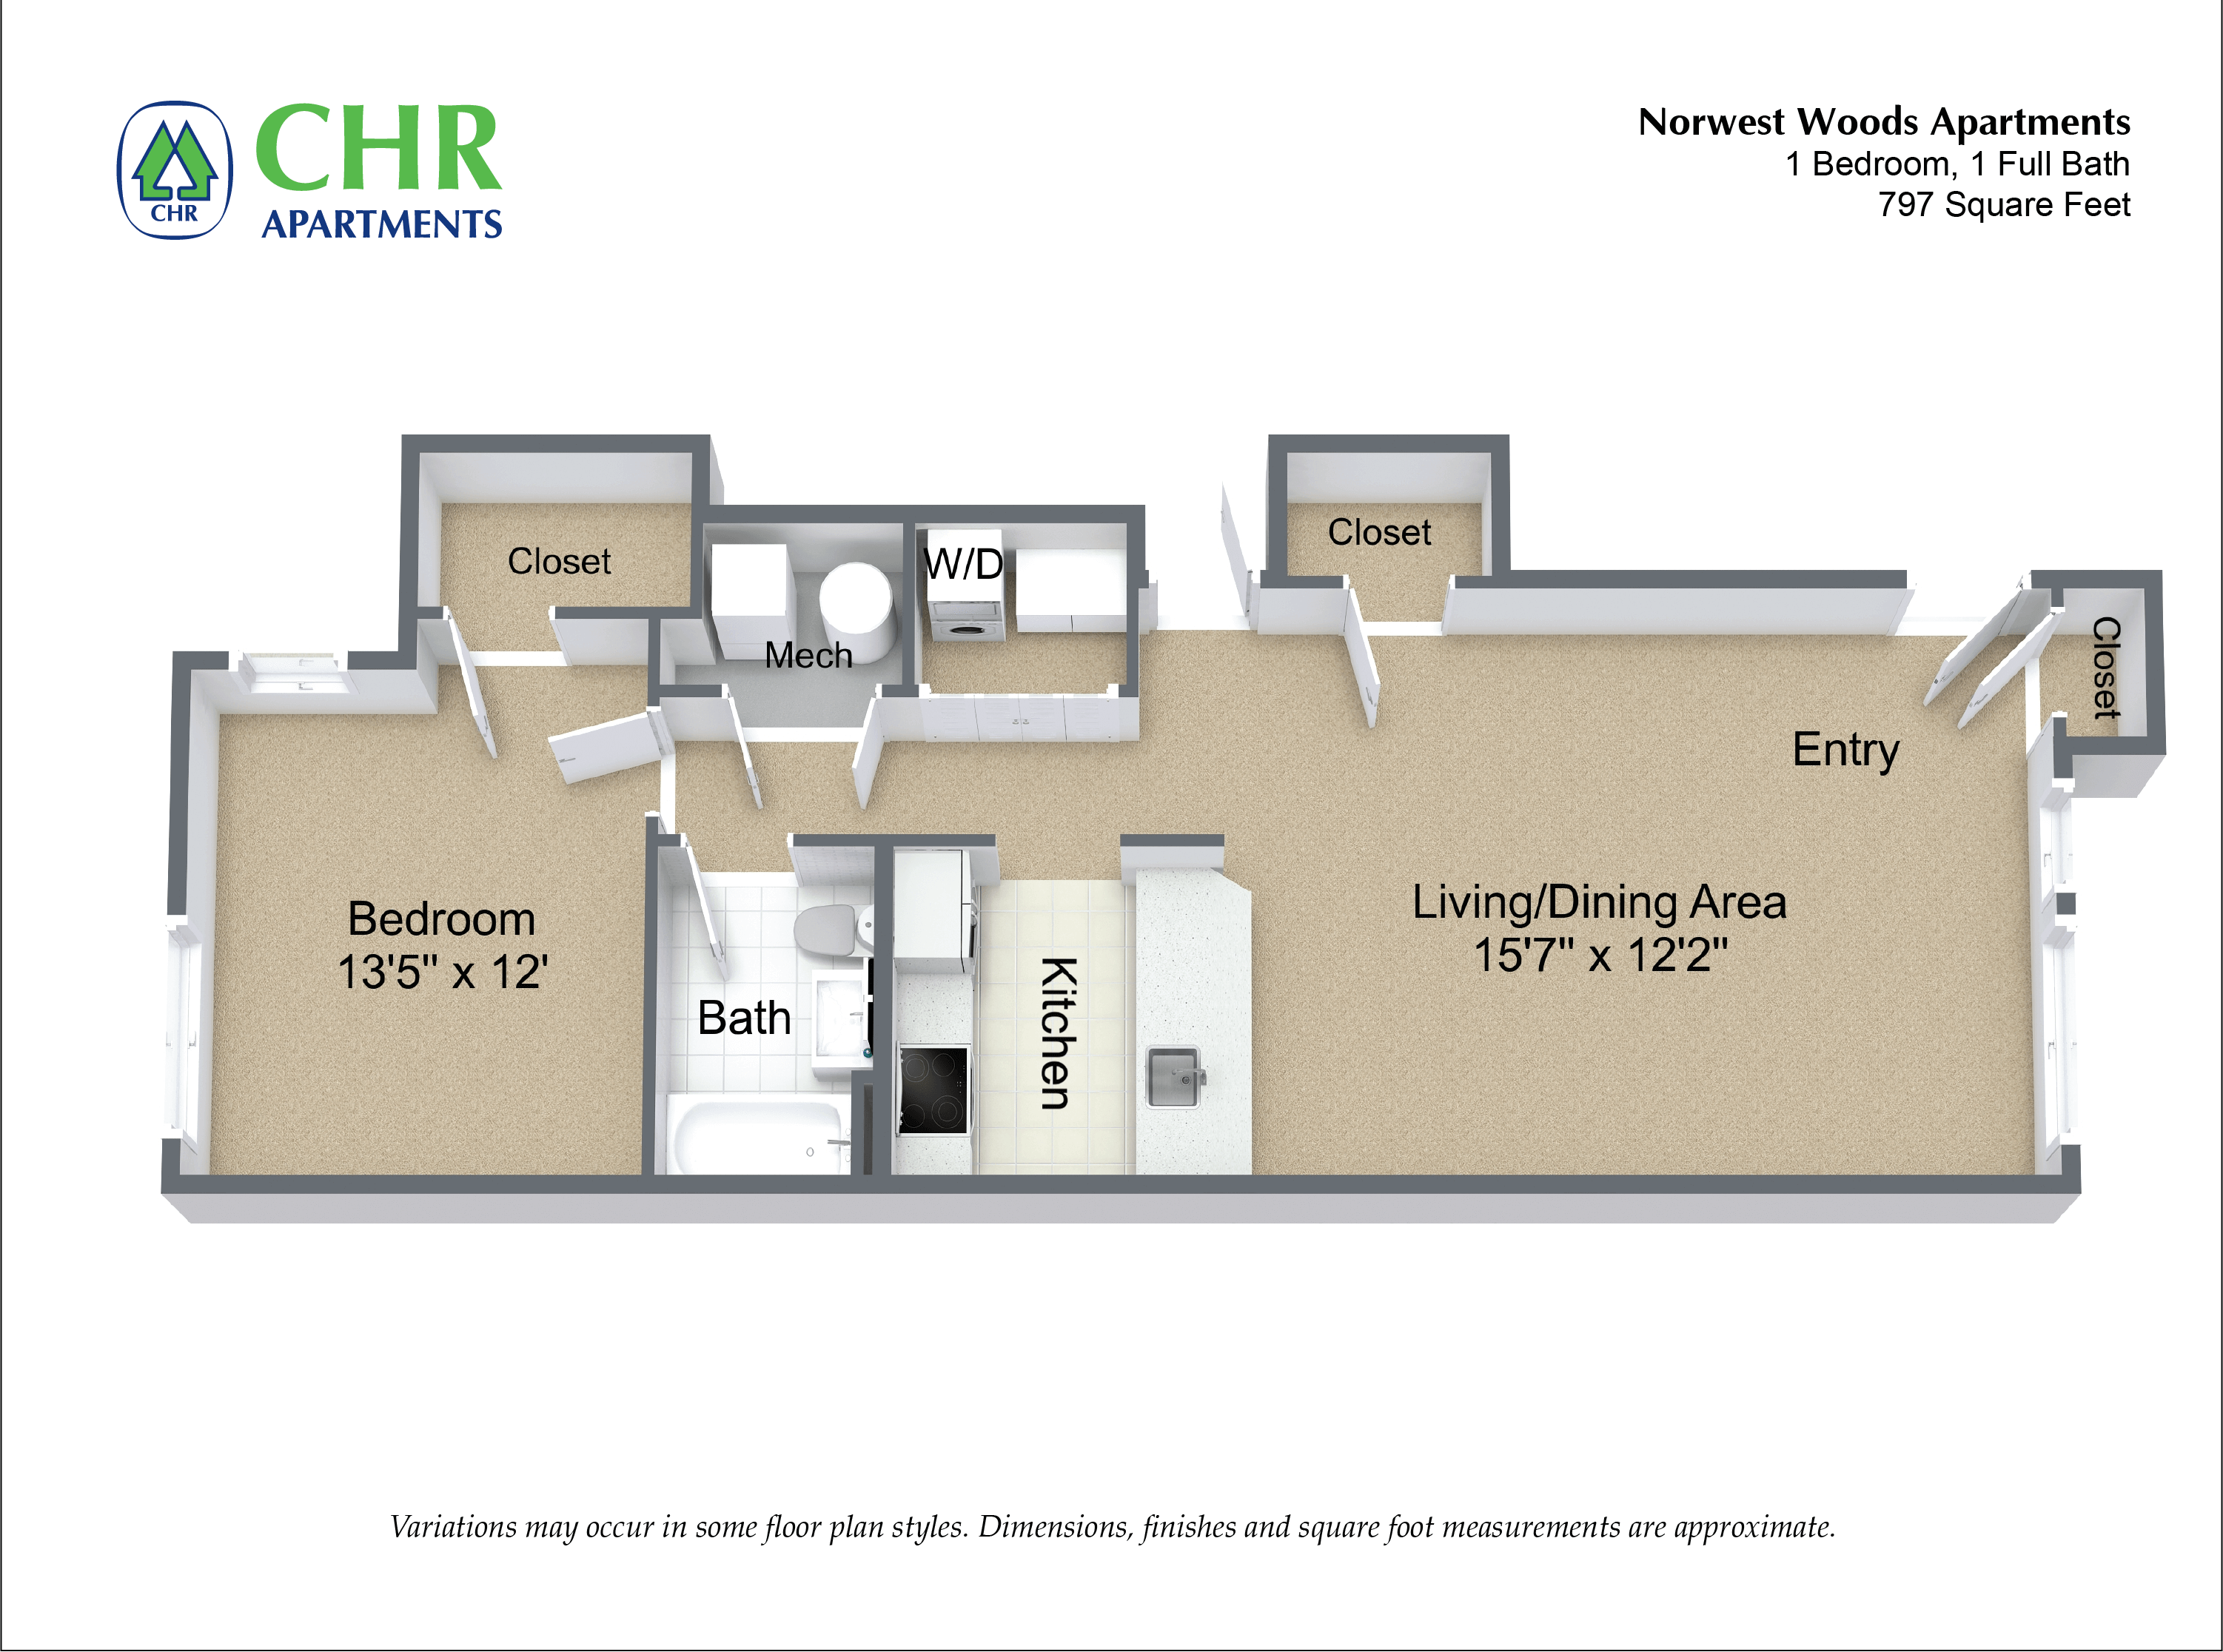 Click to view 1 Bed/1 Bath - Single Level floor plan gallery